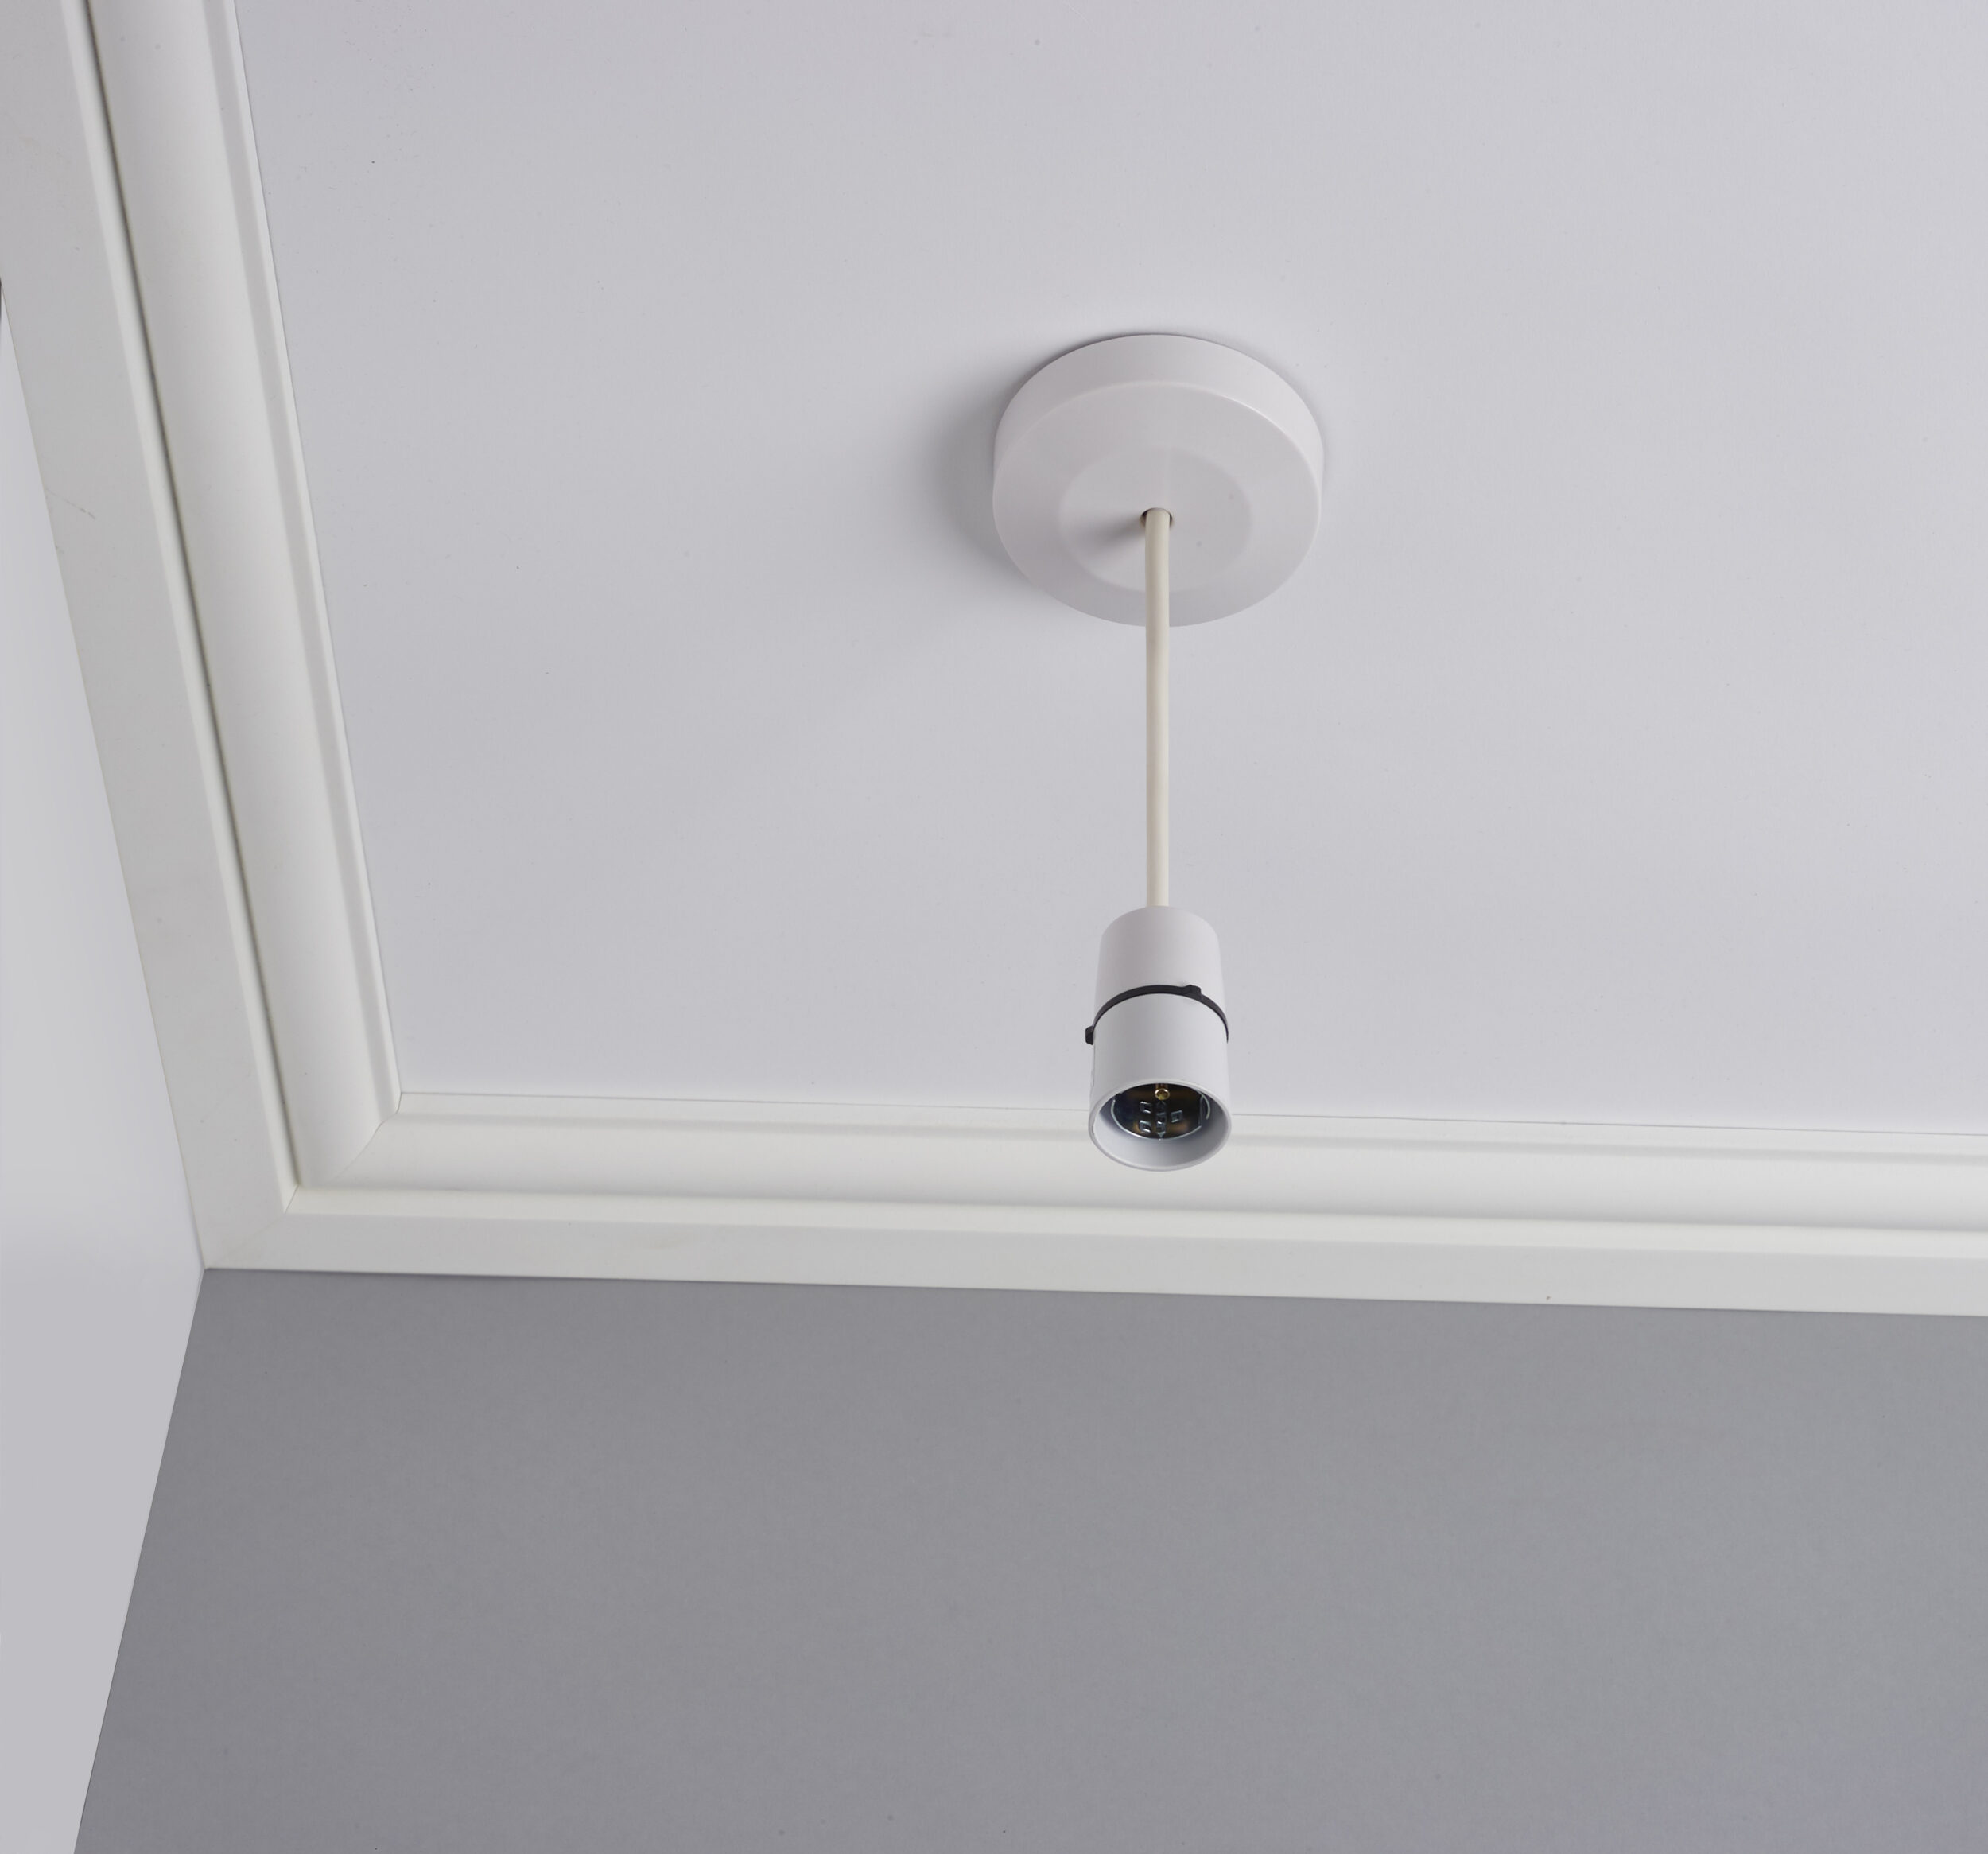 Schneider Electric Launches New Ceiling Accessories